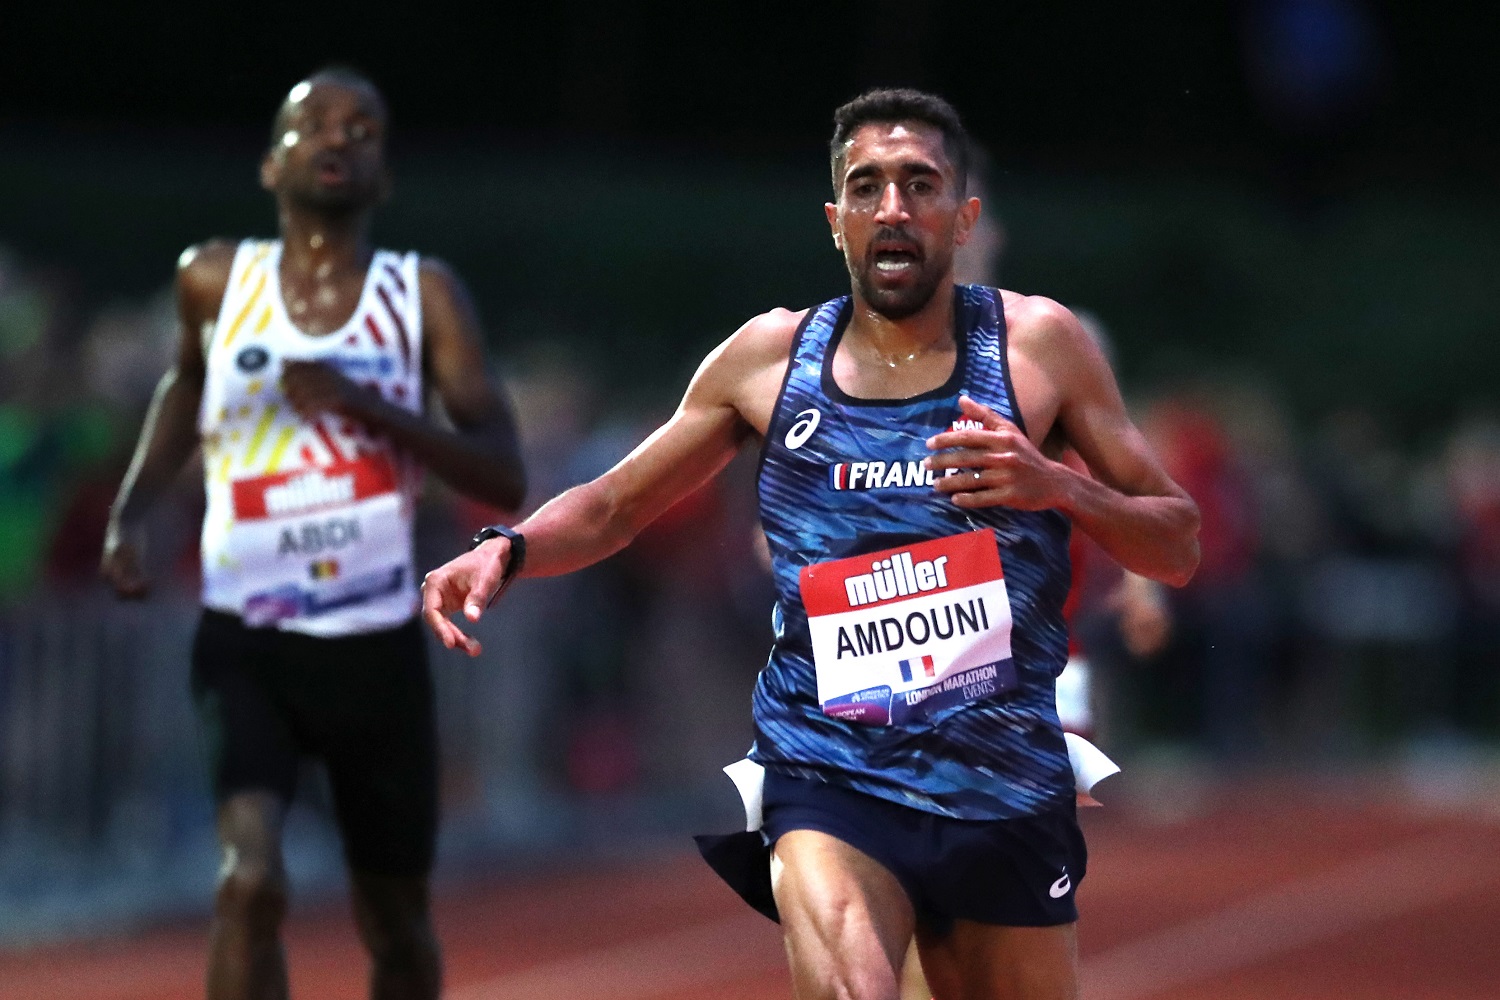 Morhad Amdouni of France wins the men's 10,000 meters during the Muller British Athletics Championships & European Athletics Cup at University of Birmingham on June 5, 2021, in England.